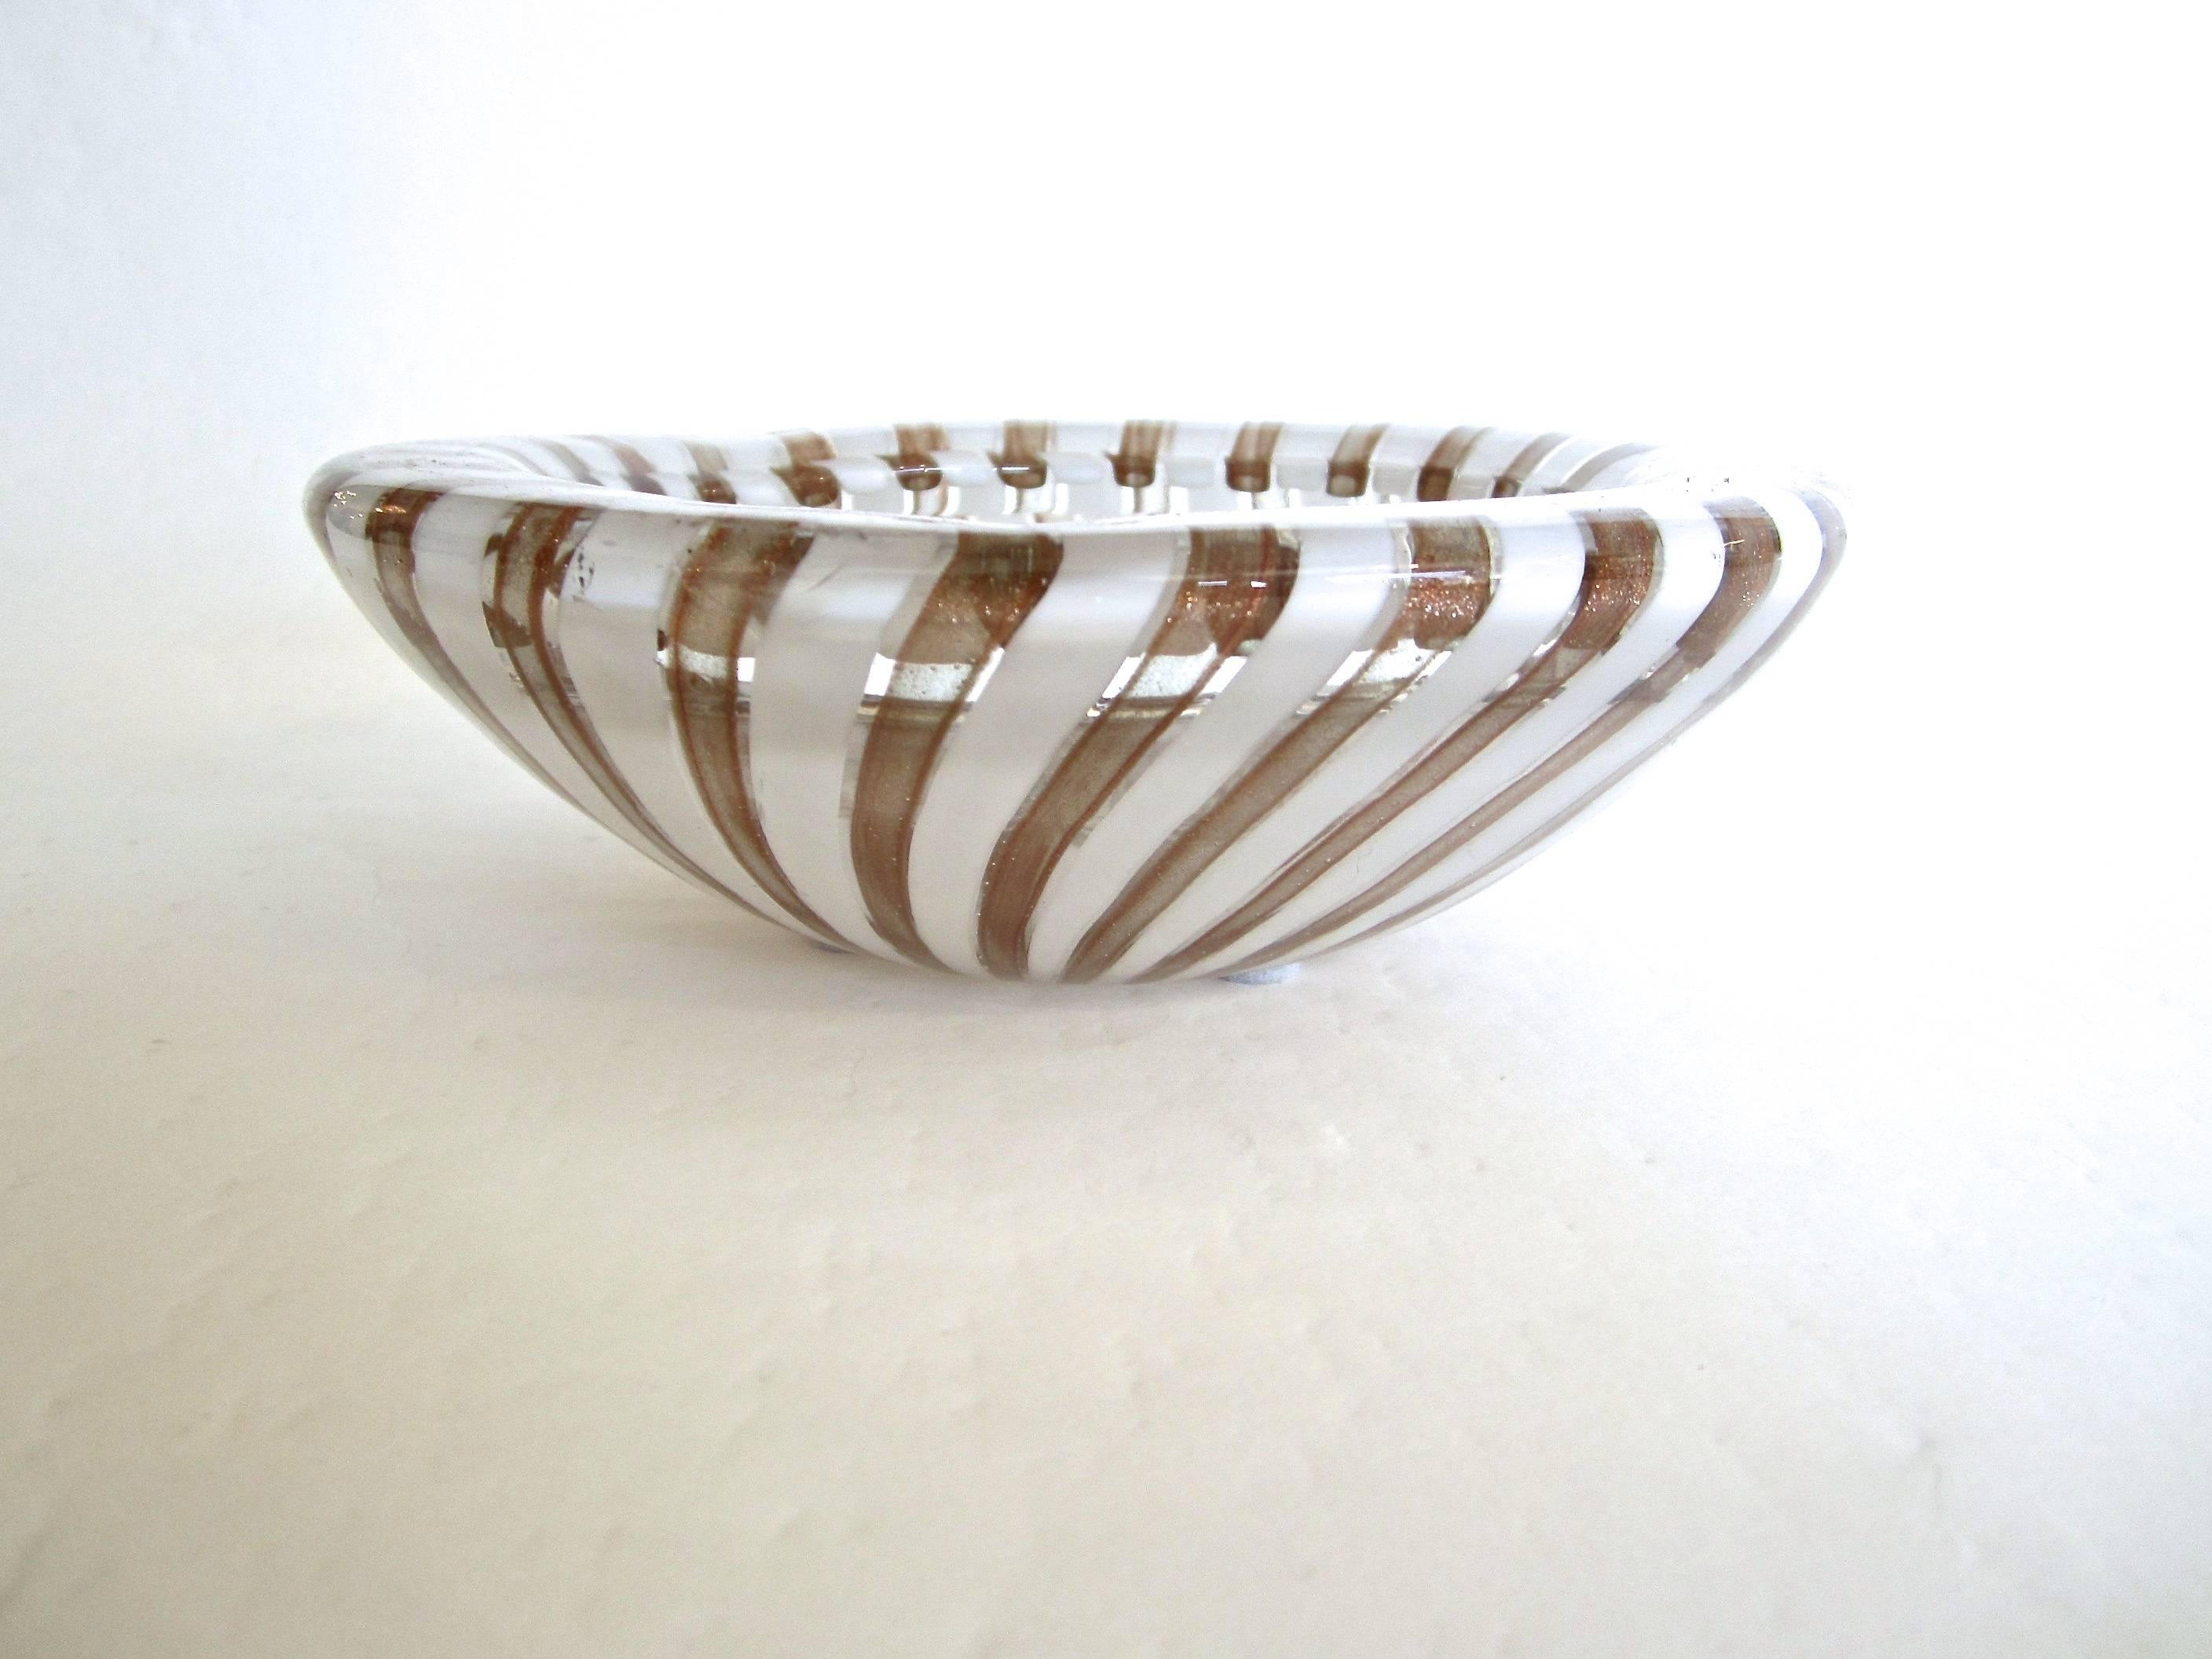 Beautiful handblown Murano glass bowl with infused copper flecking next to white stripe swirls. Bowl has thick structured rim. Great as display and also for utilitarian use.